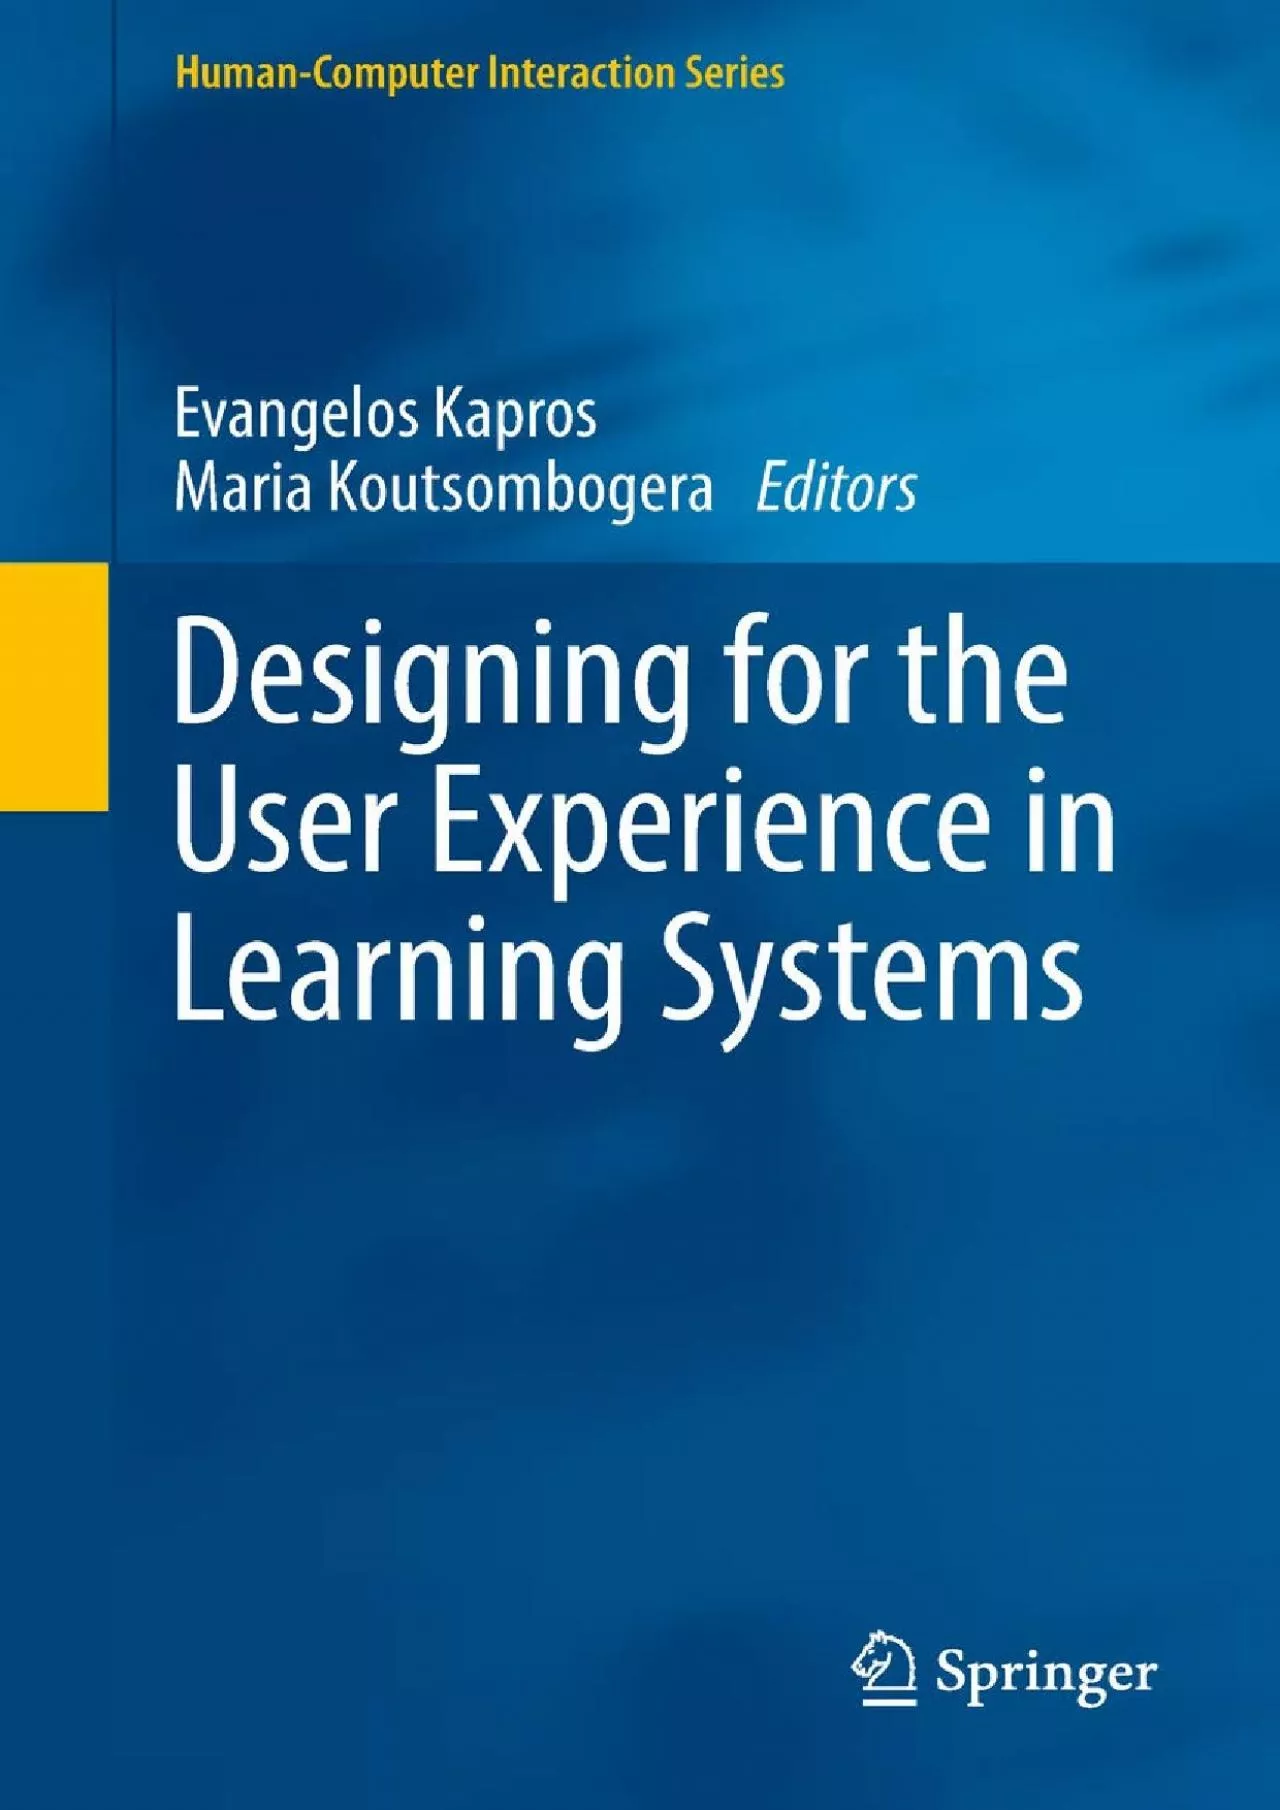 (BOOS)-Designing for the User Experience in Learning Systems (Human–Computer Interaction